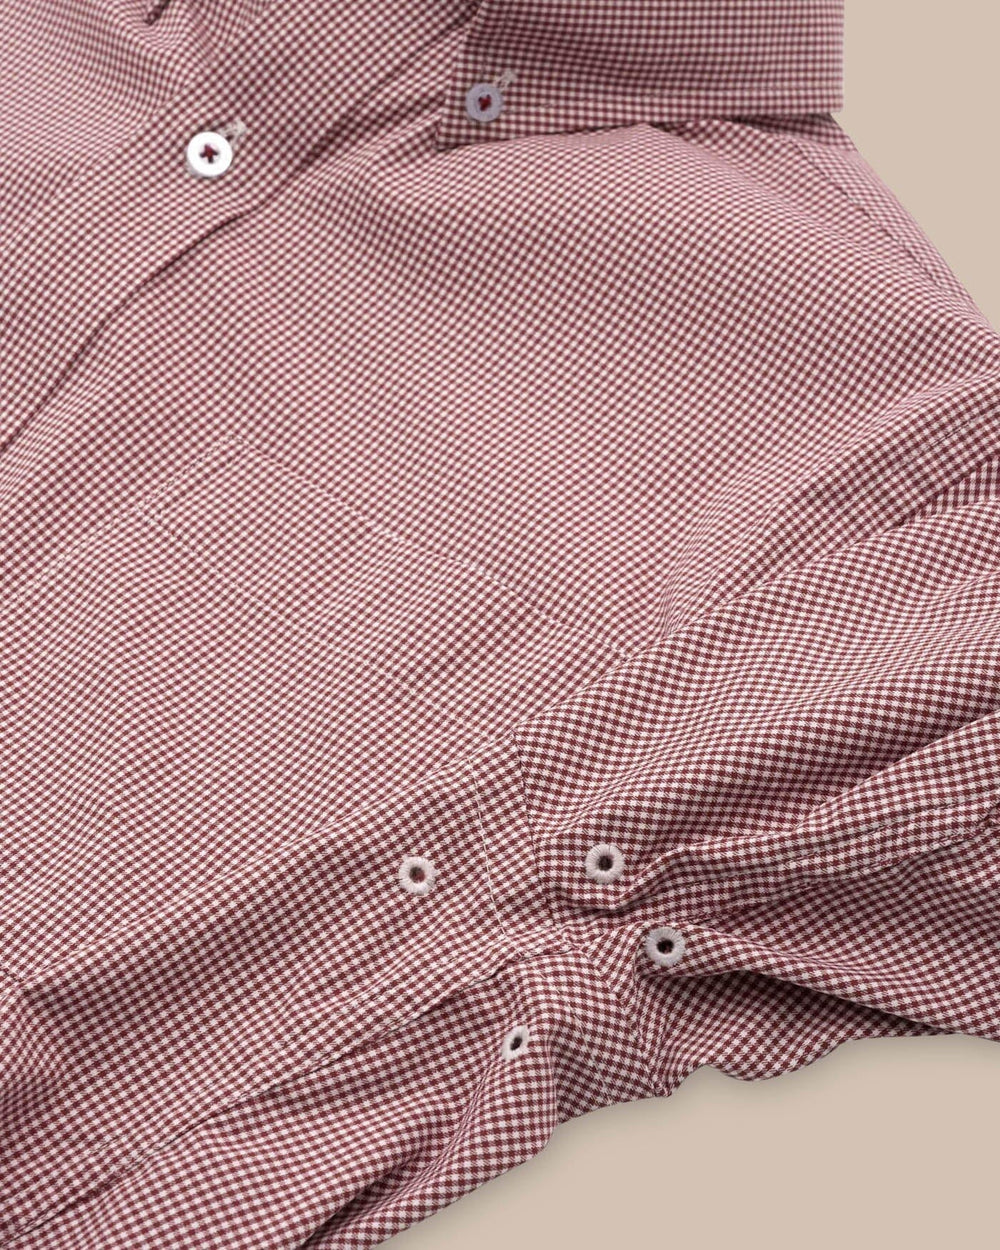 The detail view of the Southern Tide Team Colors Gingham Intercoastal Sport Shirt by Southern Tide - Chianti